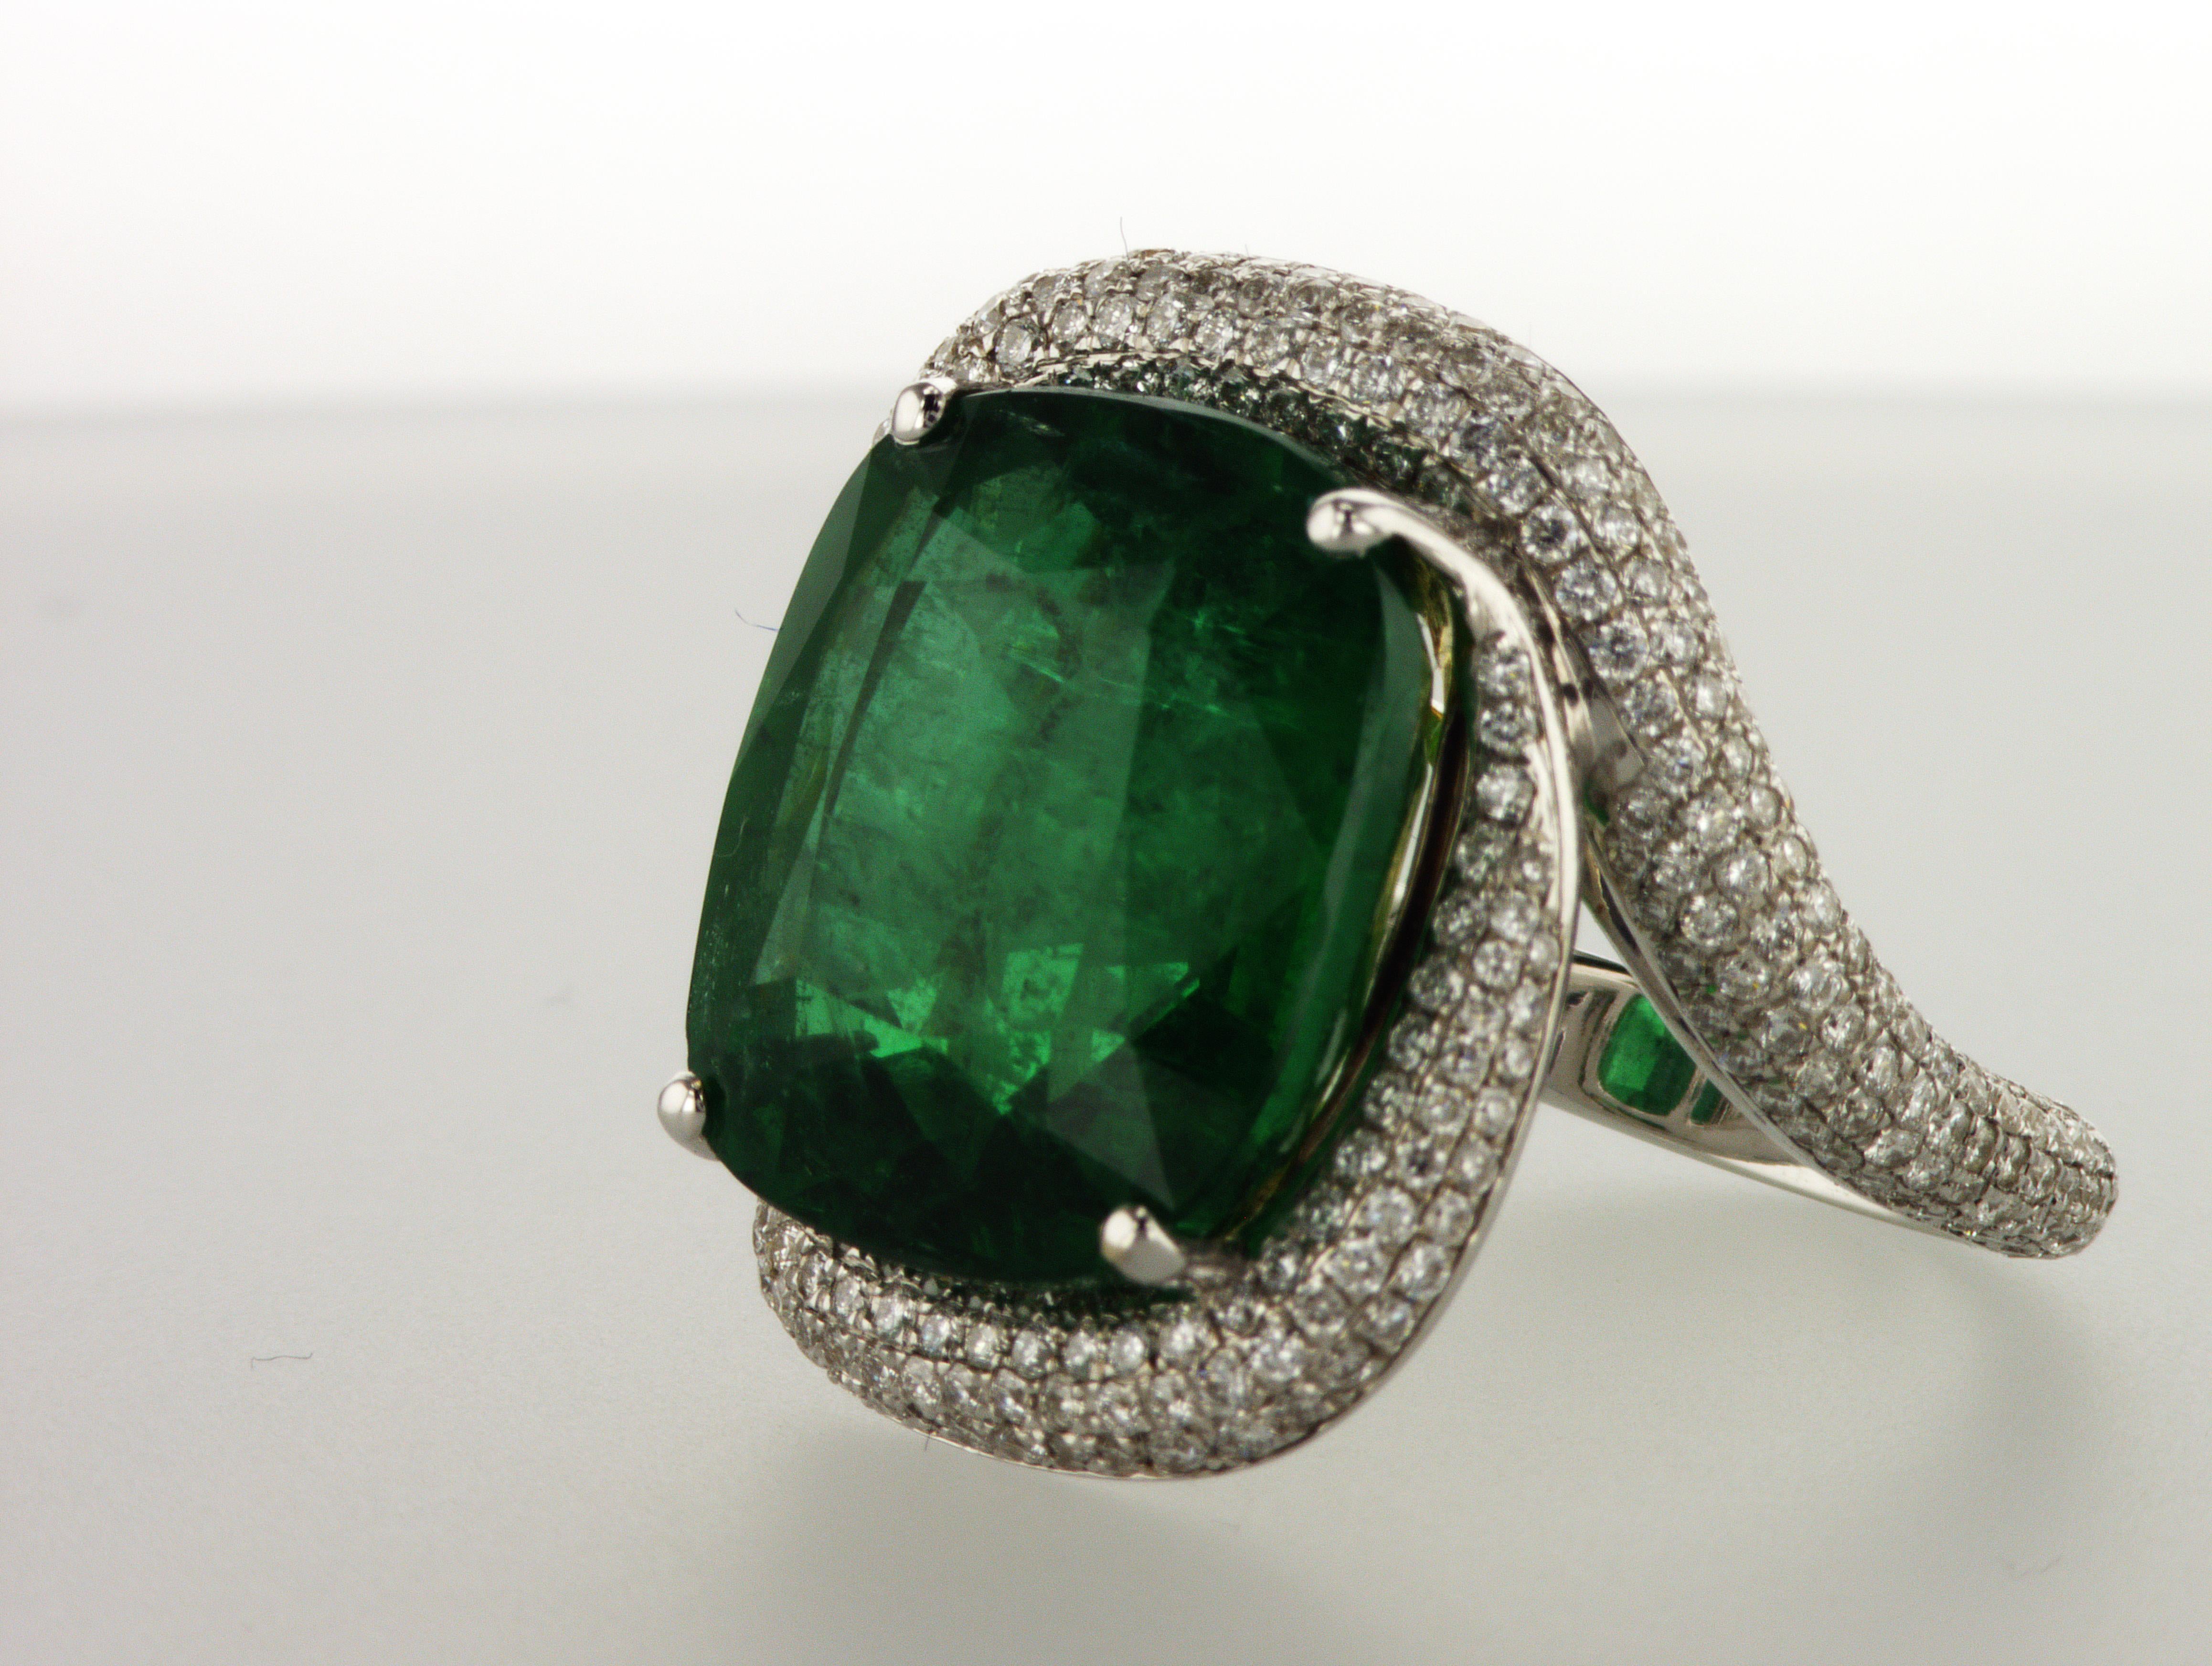 18K Diamond Ring with 13.98 ct Cushion Vivid Green Zambian Emerald and 1.41 ct Diamonds. This World Class magnificent Zambian Emerald can attract the attention of any person. Certified by GRS Lab with special report that you can view in video file